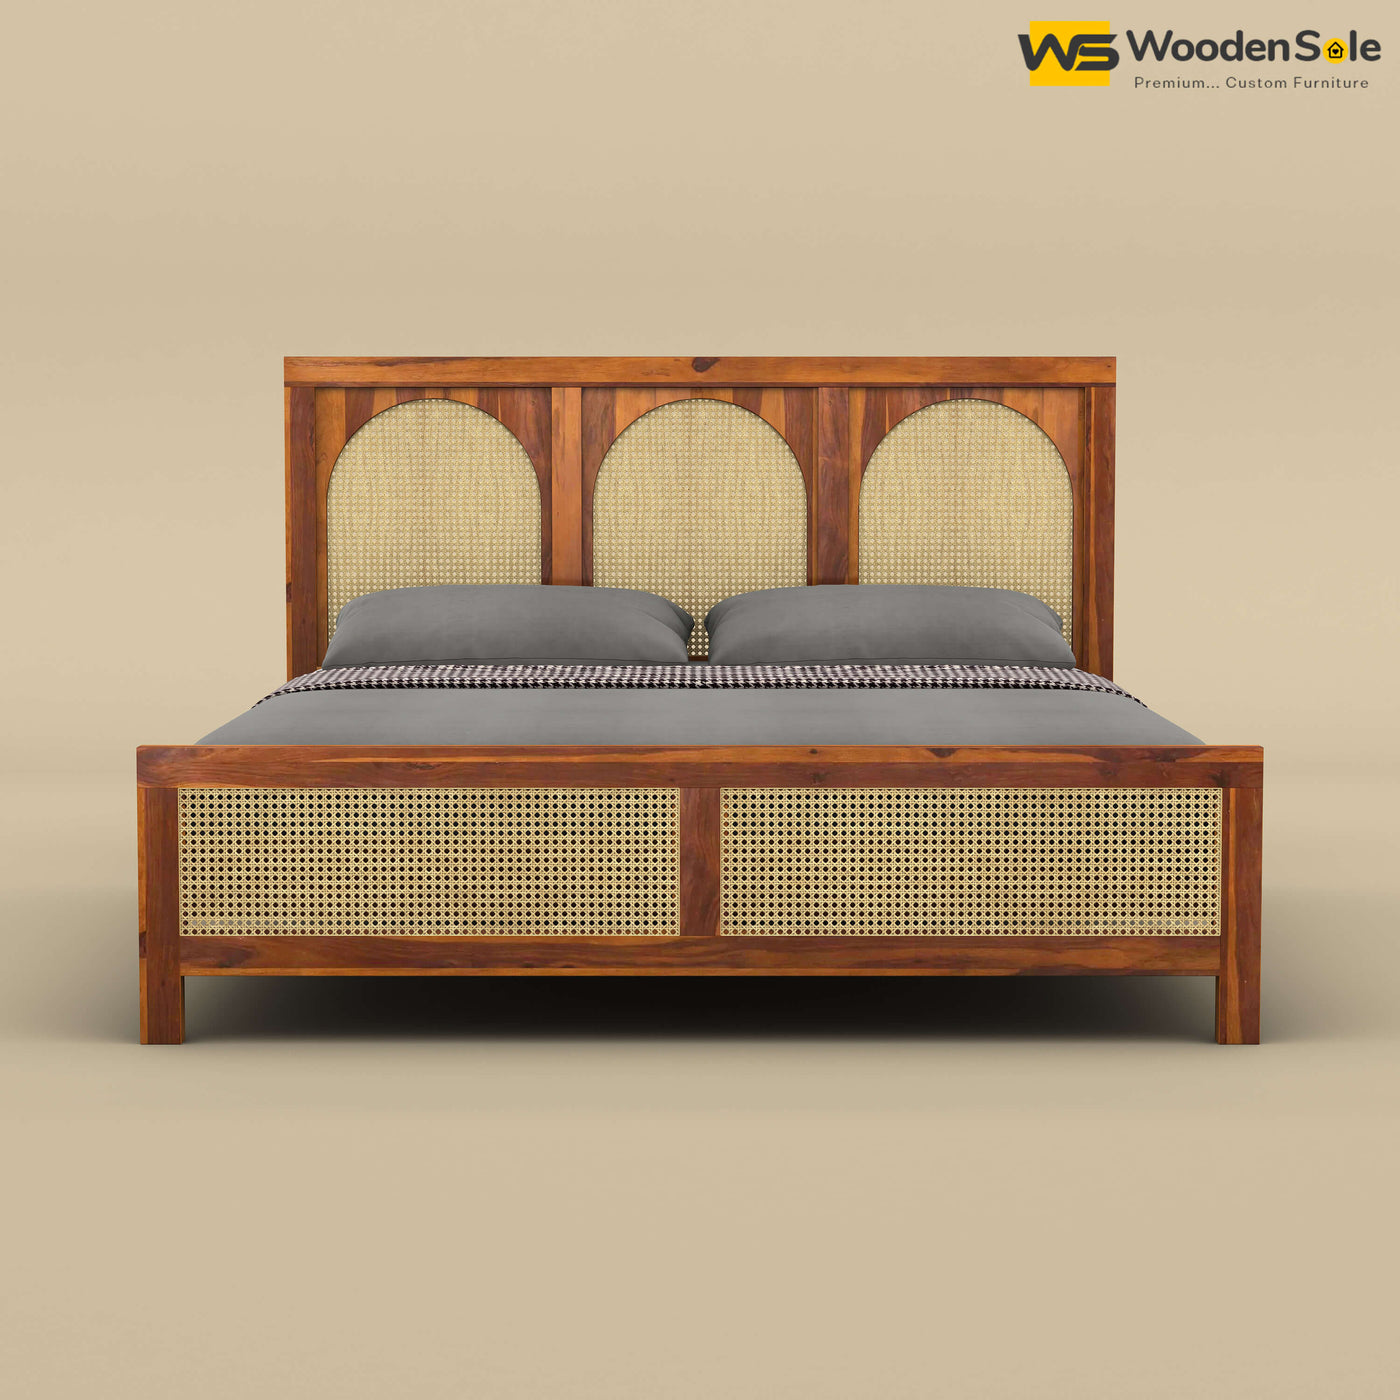 Wooden Rattan Cane Bed (King Size, Honey Finish)